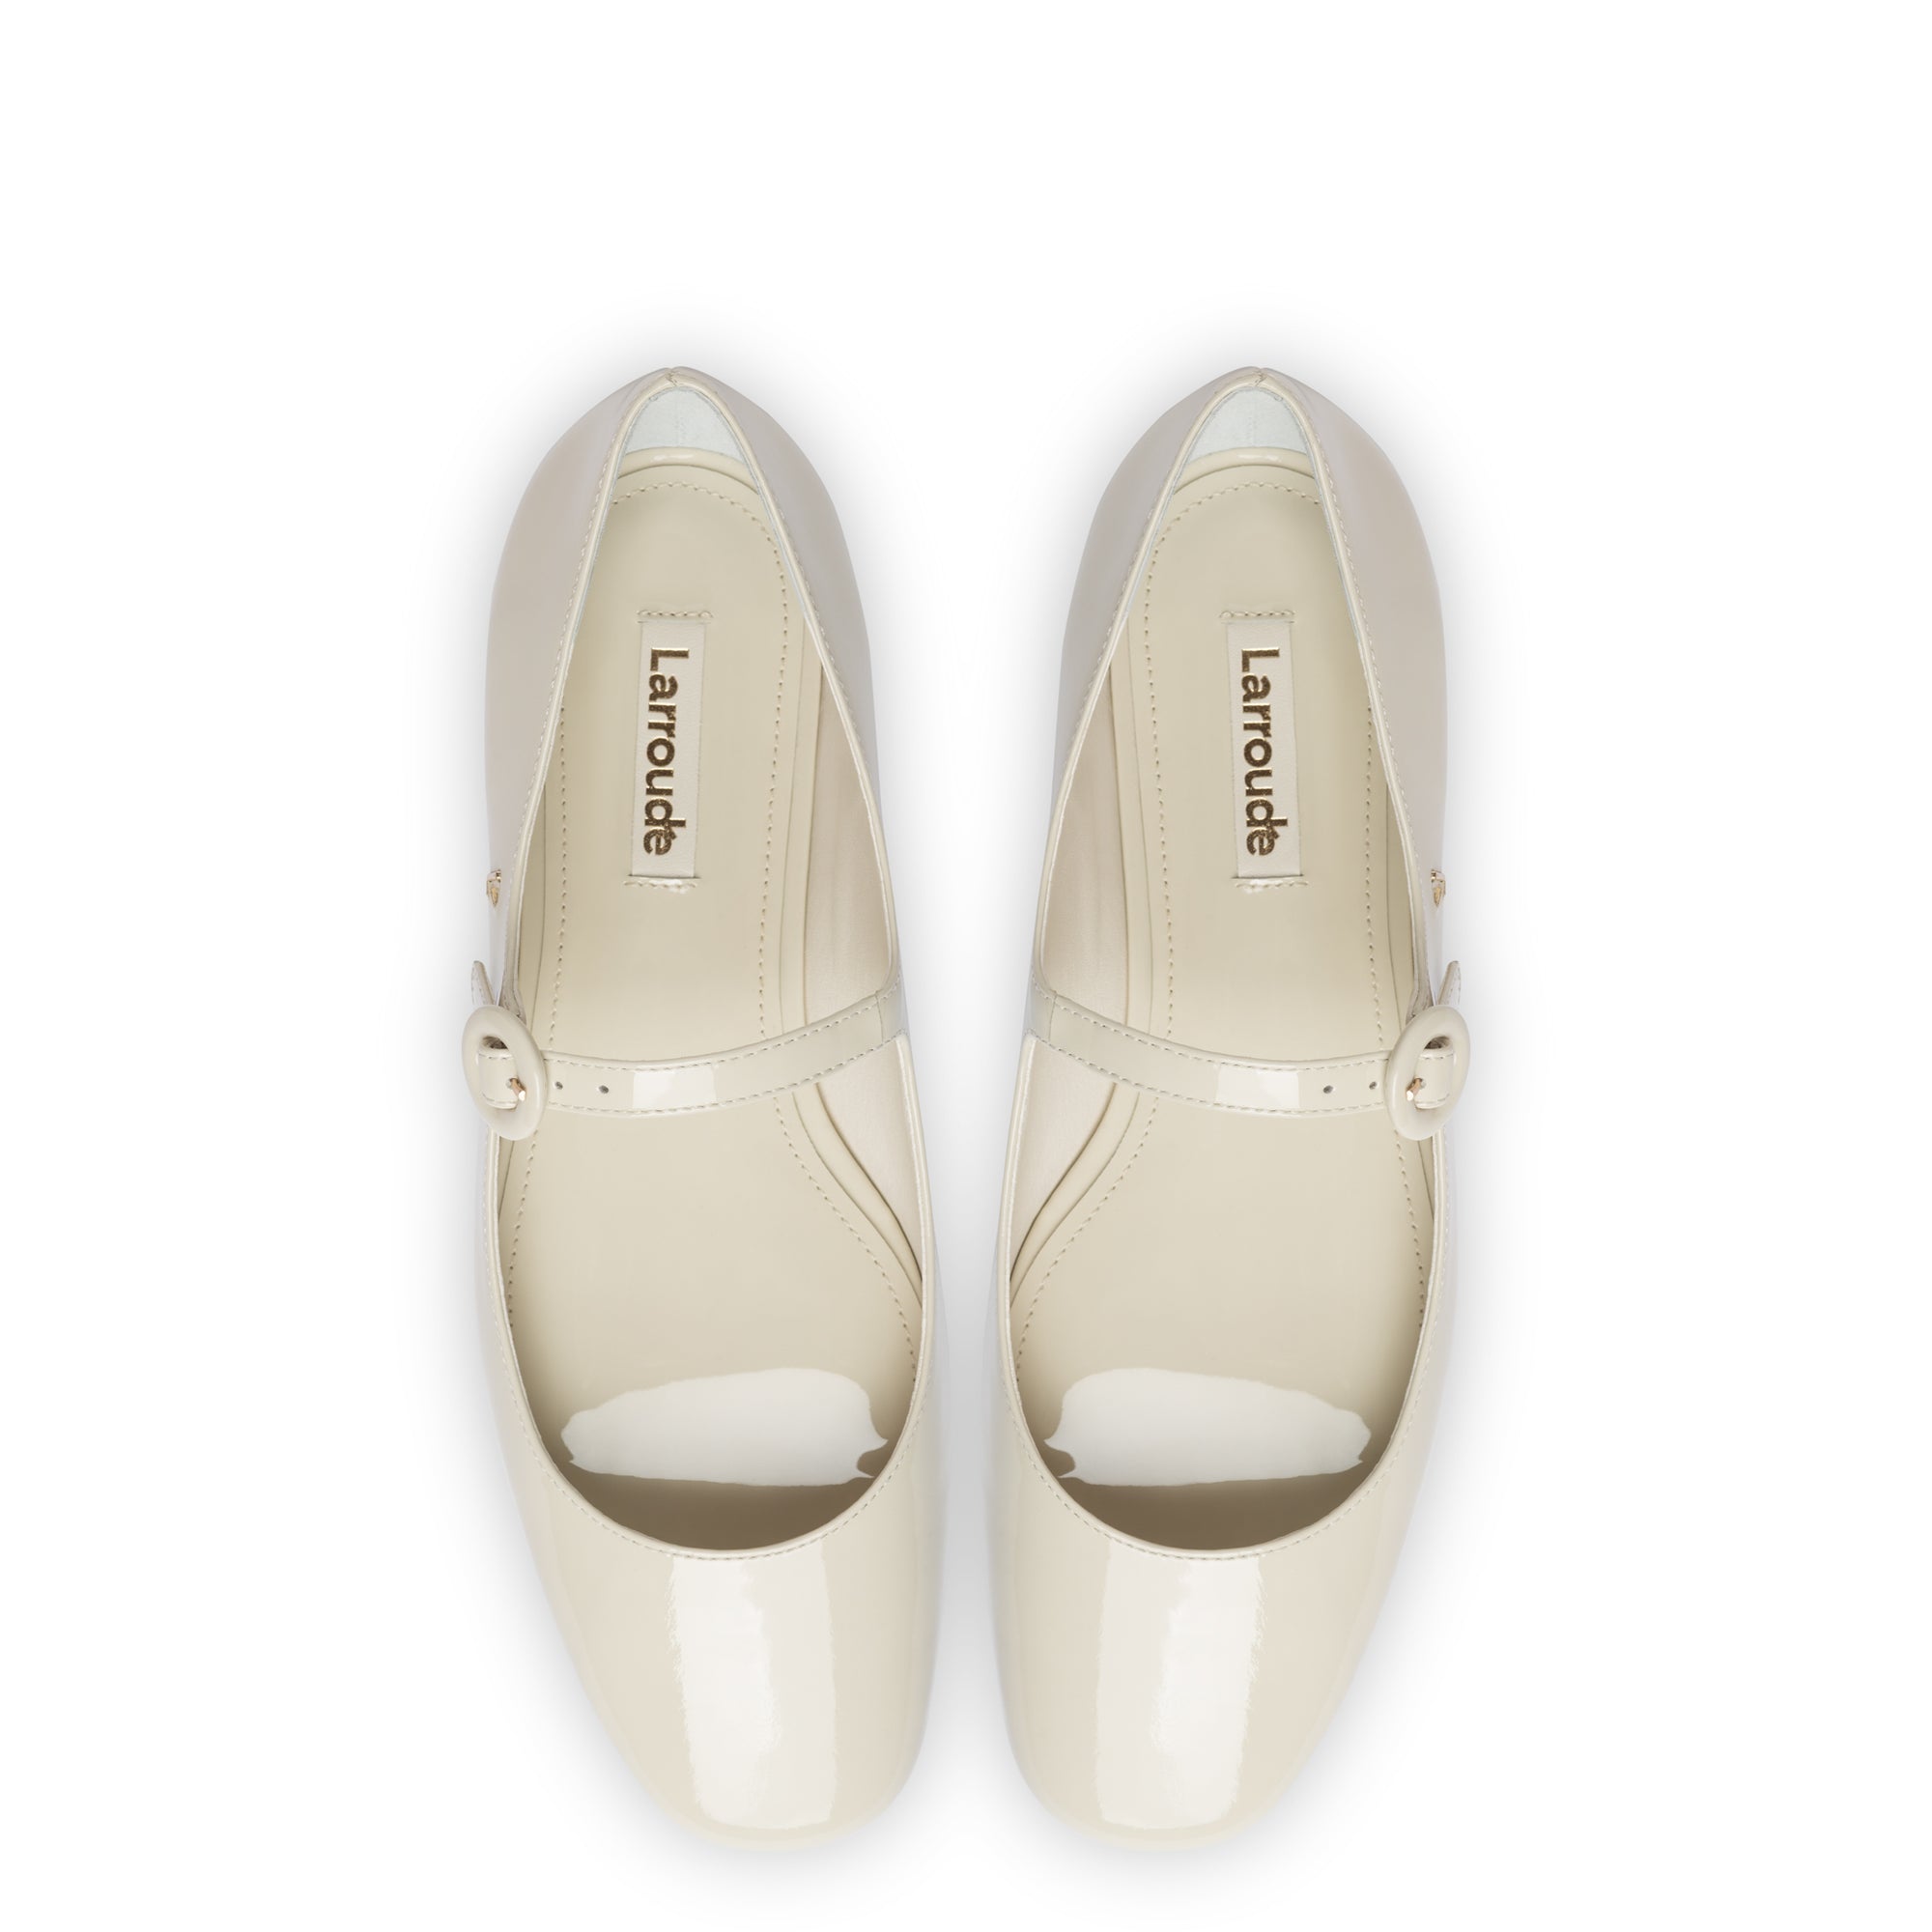 Blair Ballet Flat In Ivory Patent Leather - Larroude